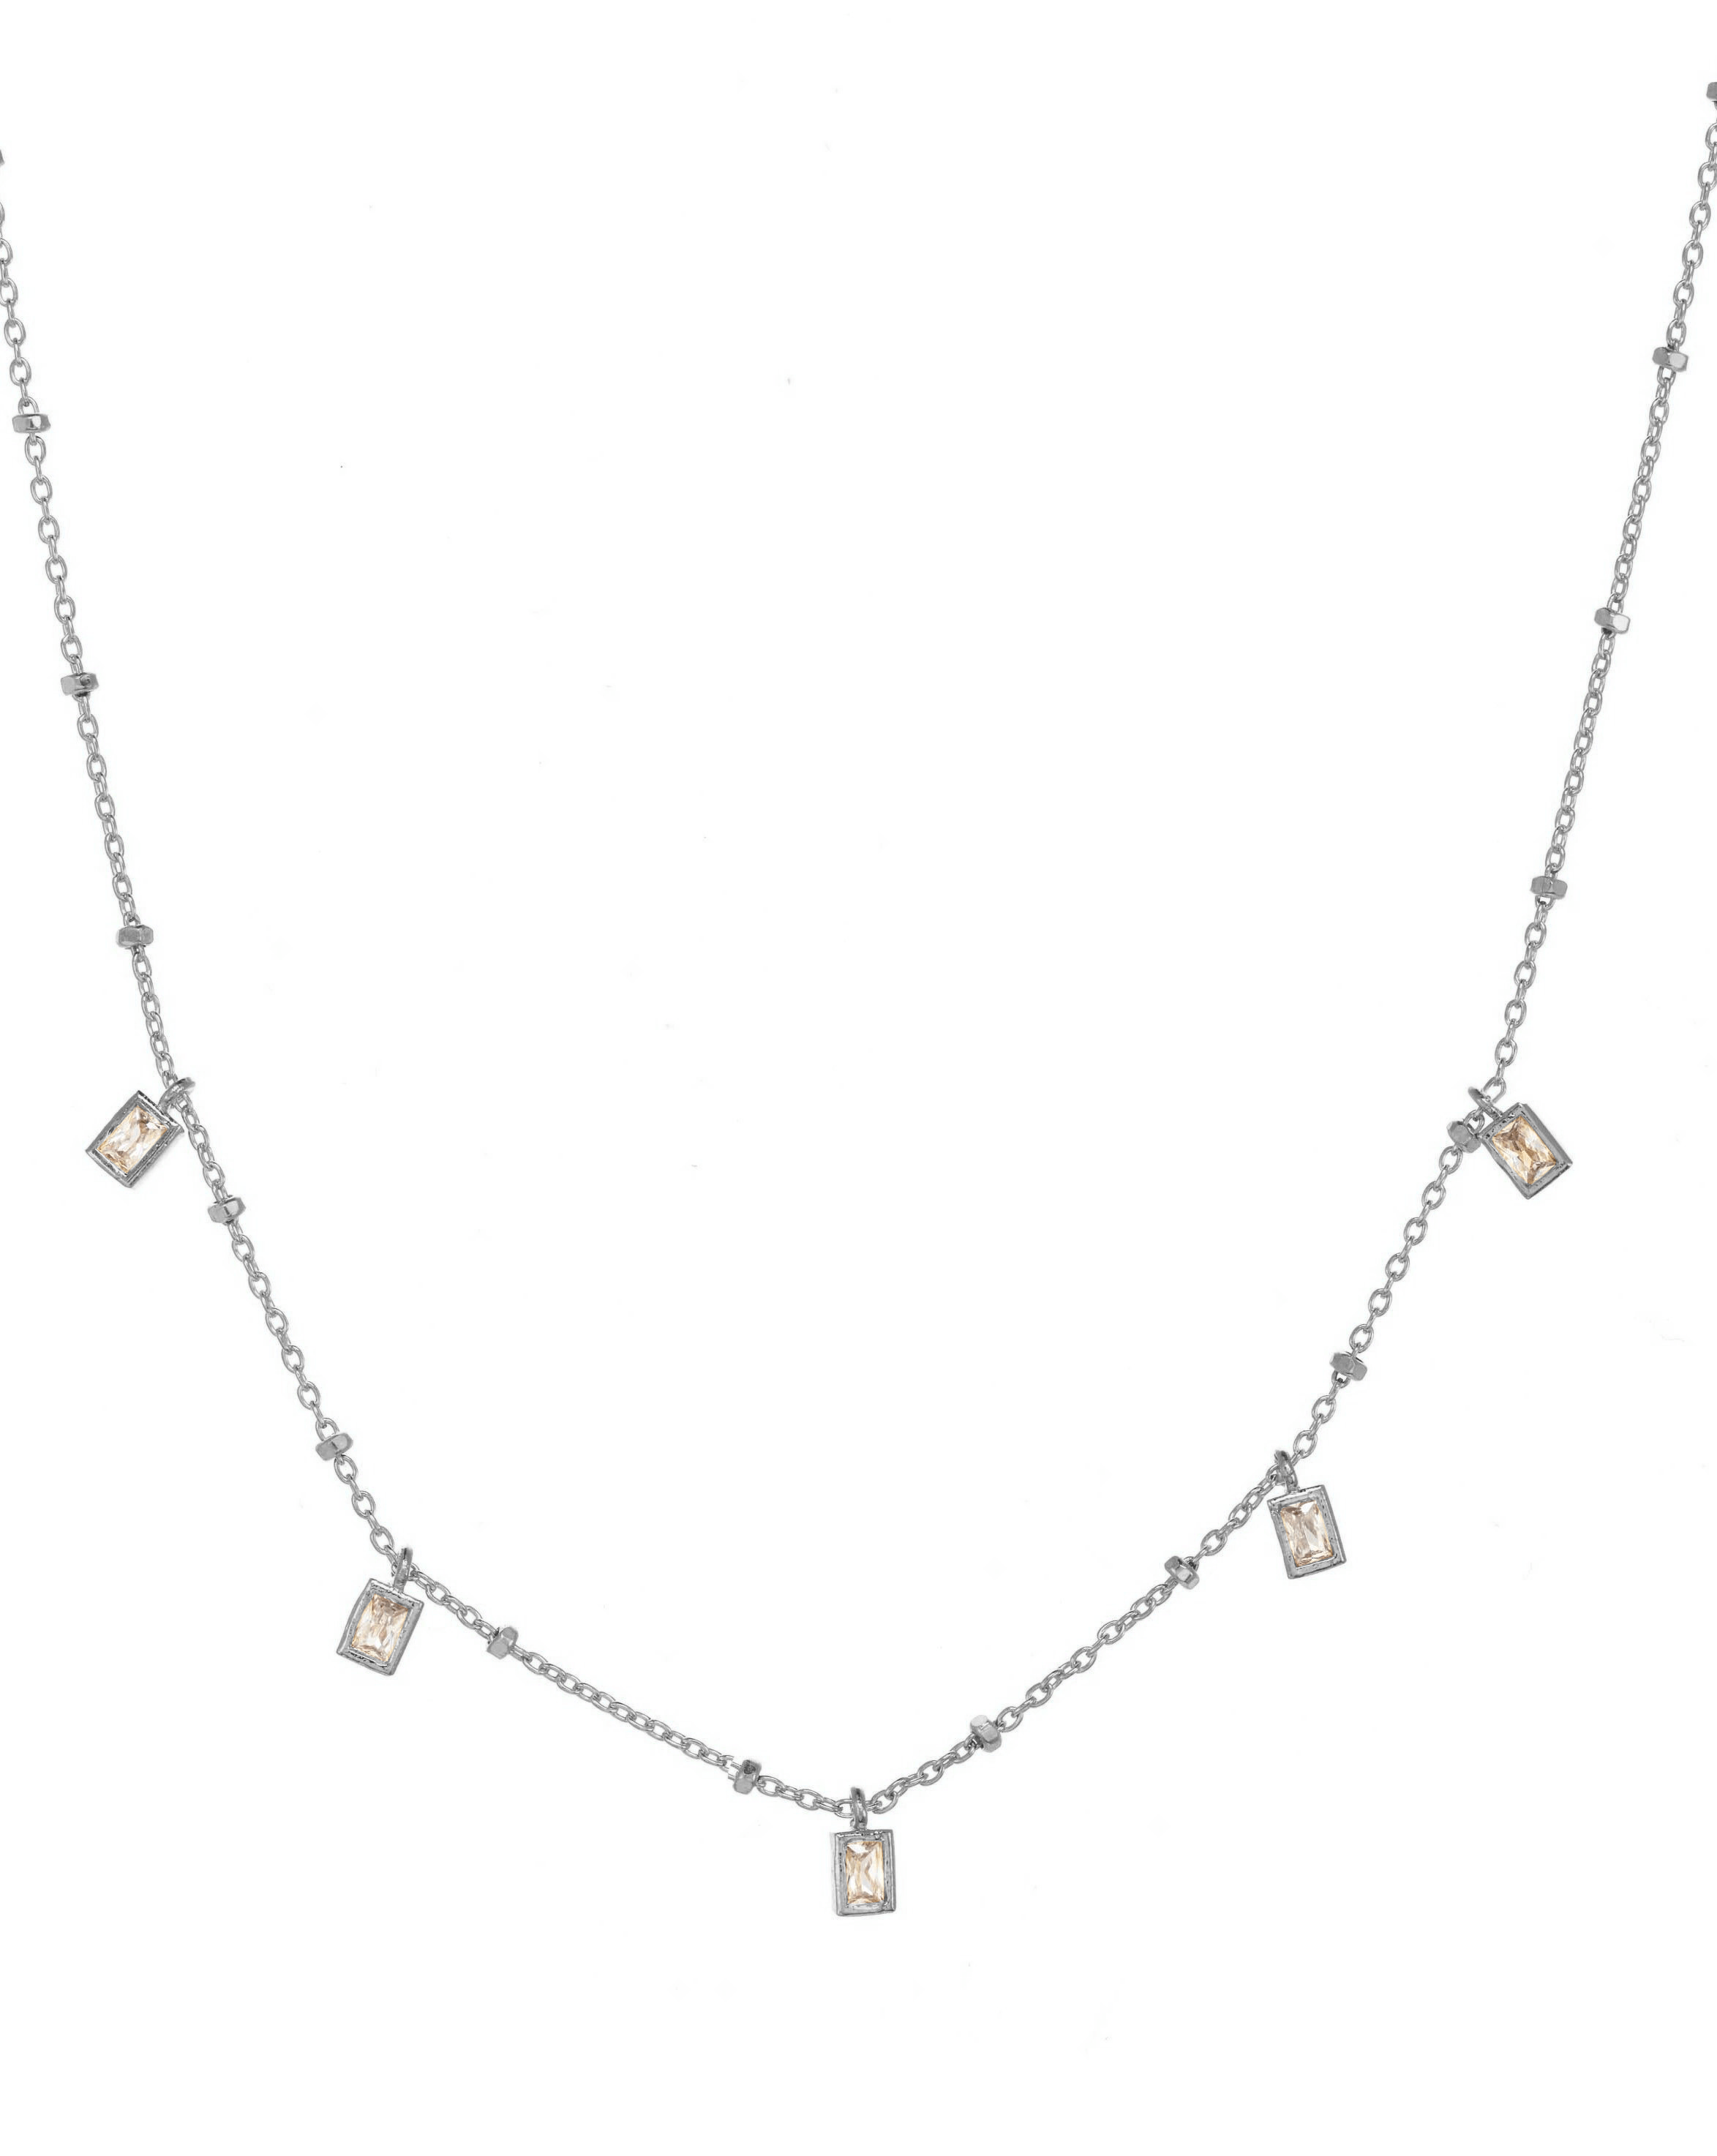 Cinco Necklace by KOZAKH. A 16 inch long necklace in Sterling Silver, featuring 3mm rectangular Cubic Zirconias.